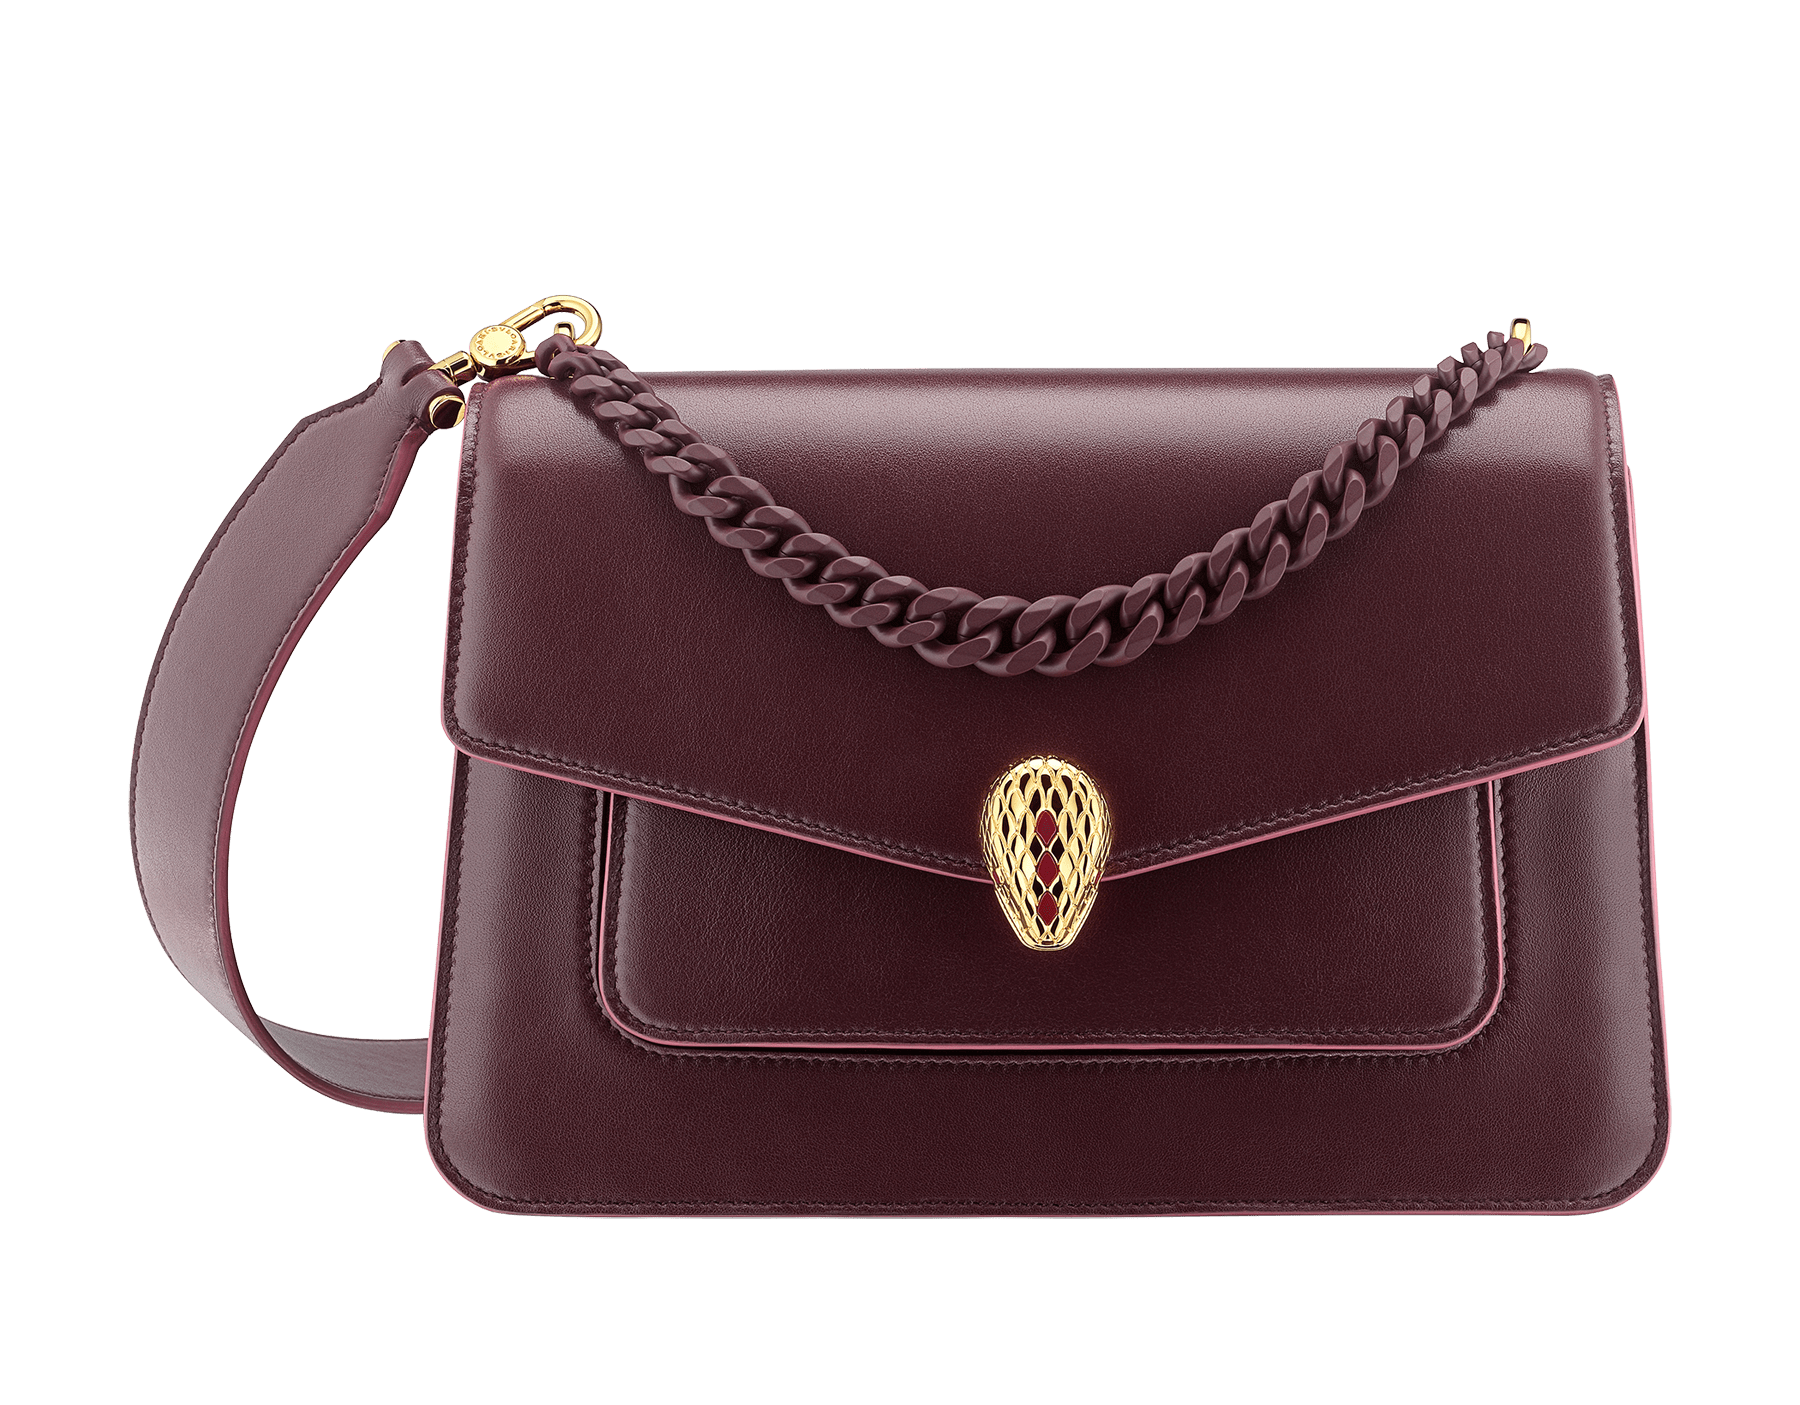 "Serpenti Forever" maxi chain crossbody bag in black nappa leather with black nappa leather inner lining. New Serpenti head closure in dark ruthenium-plated brass and finished with small black onyx scales in the middle and red enamel eyes. 1138-MCNc image 1